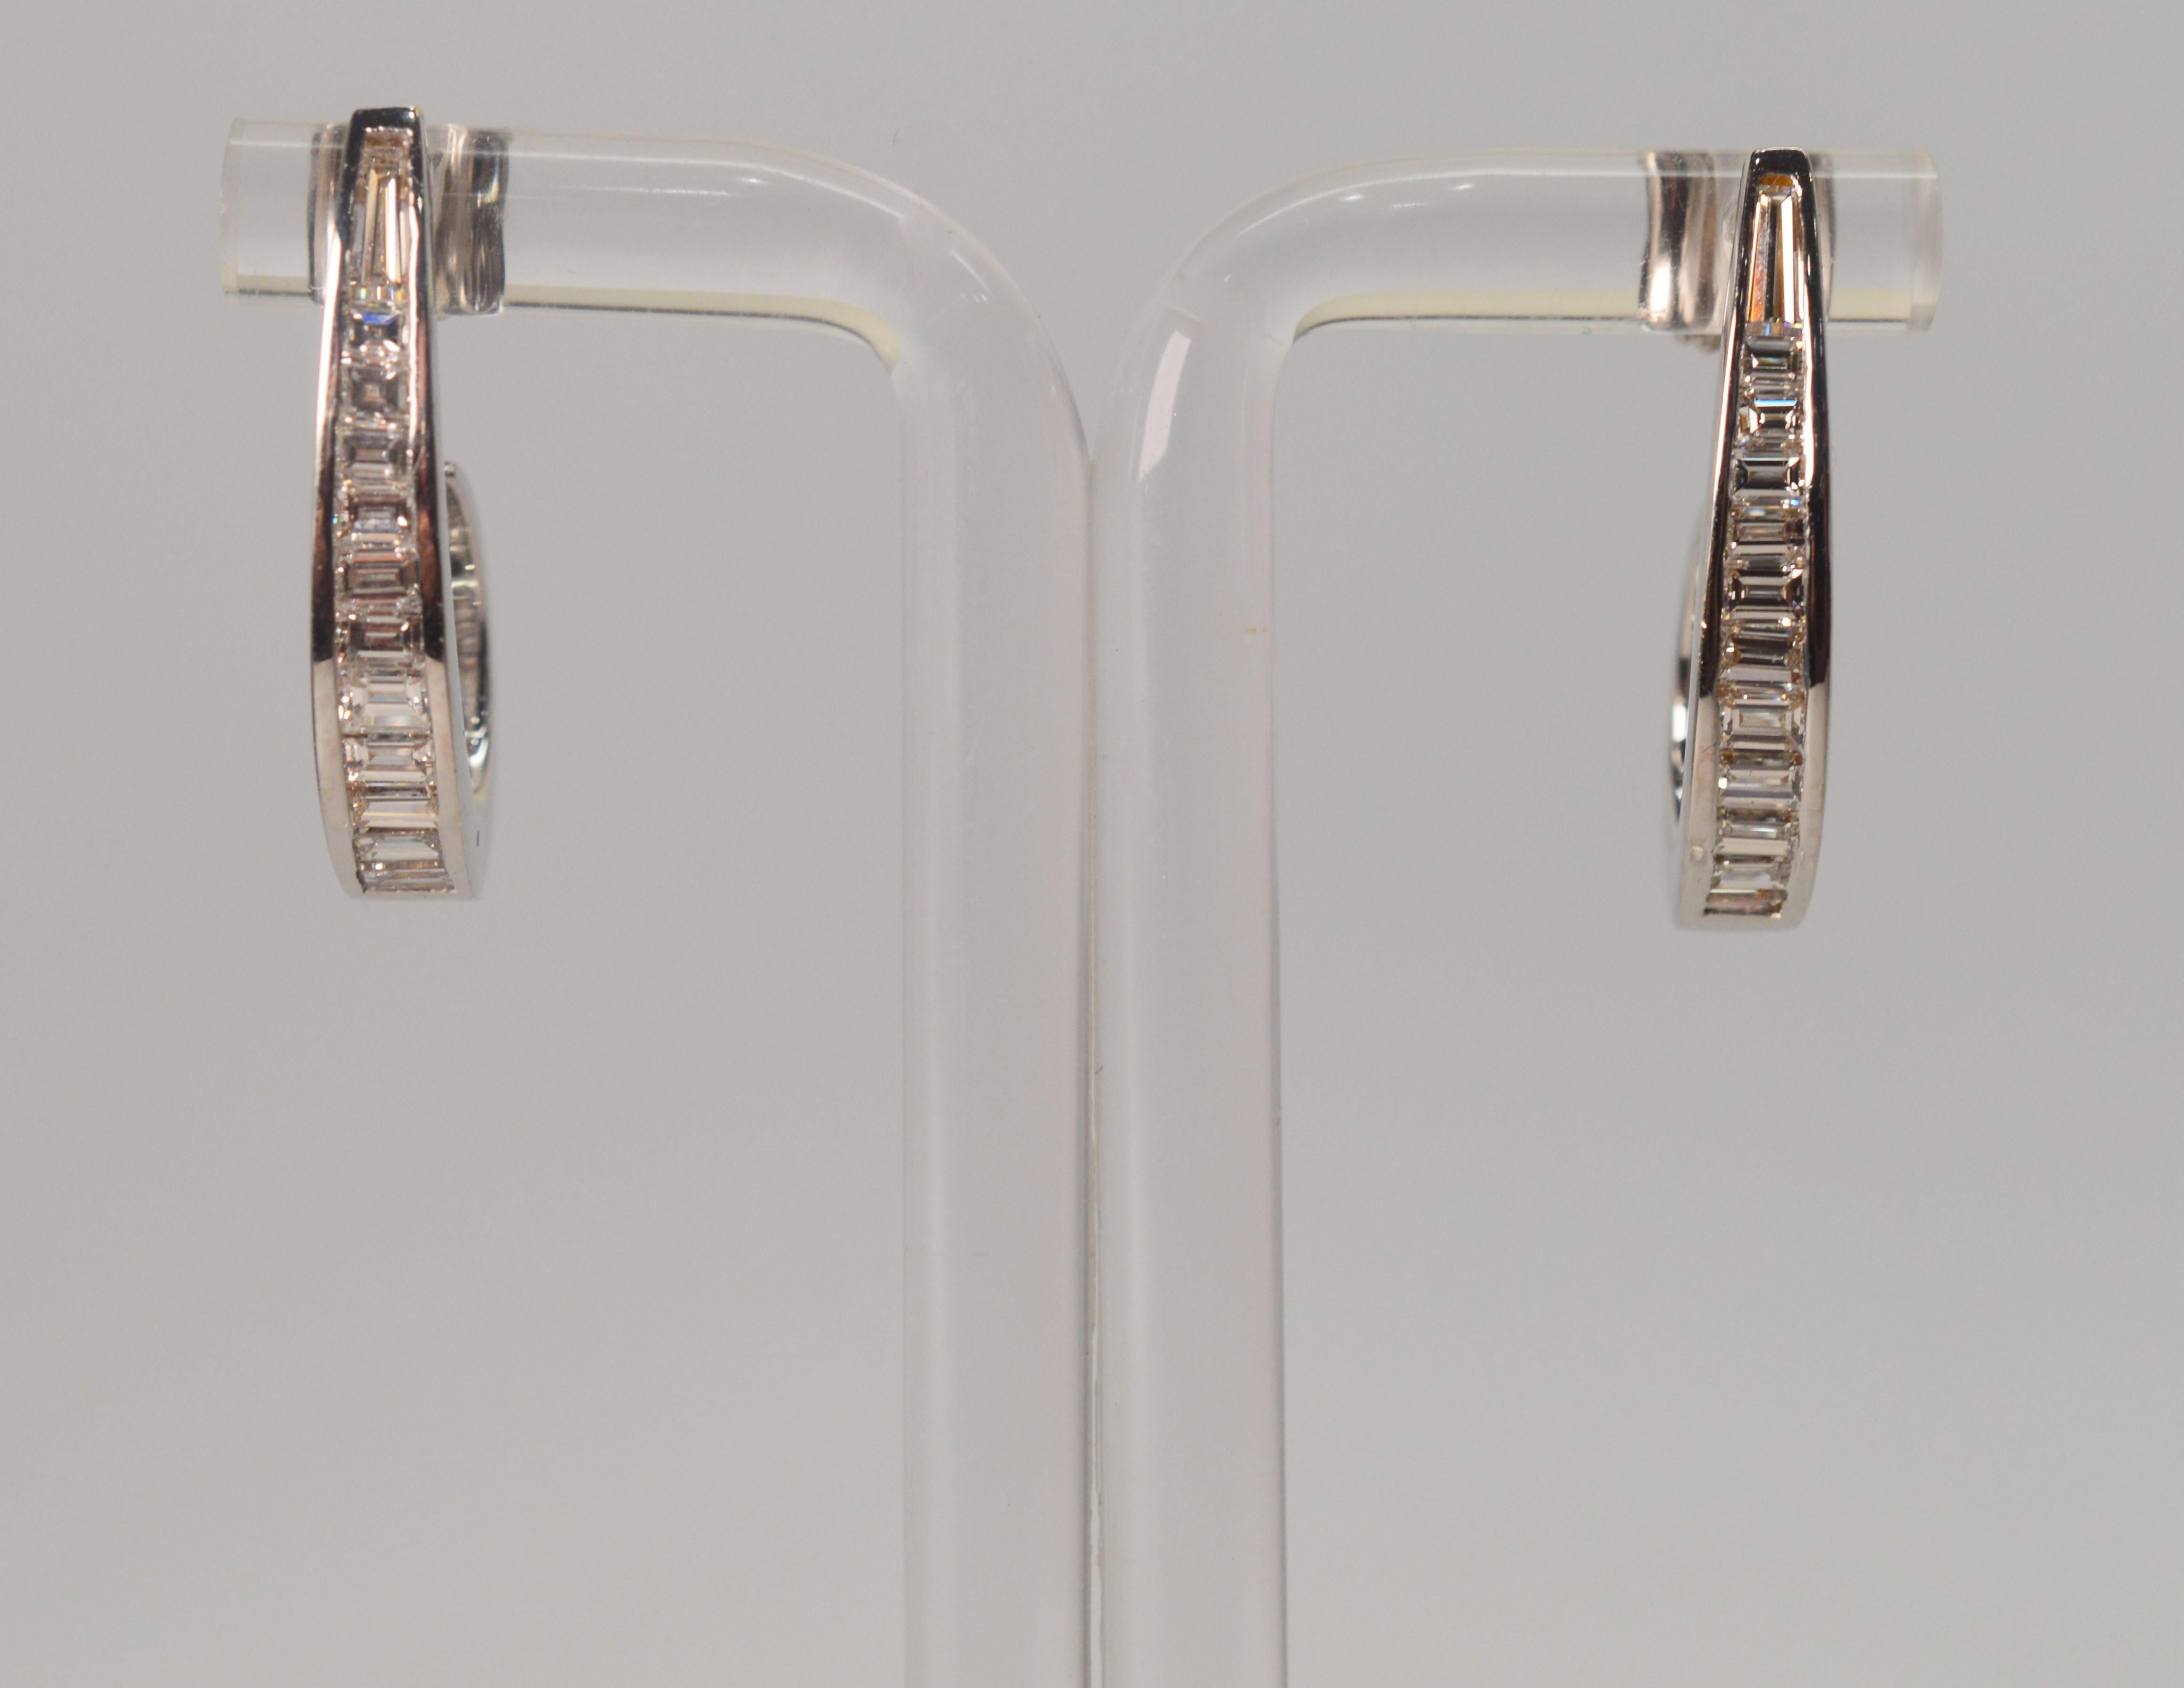 Twenty four diamonds with a total weight of over a half carat are set in a channel on a J hoop of eighteen carat white gold. Outfitted with screw back posts for pieced ears, these earrings measure 3/4 inch from post to bottom.